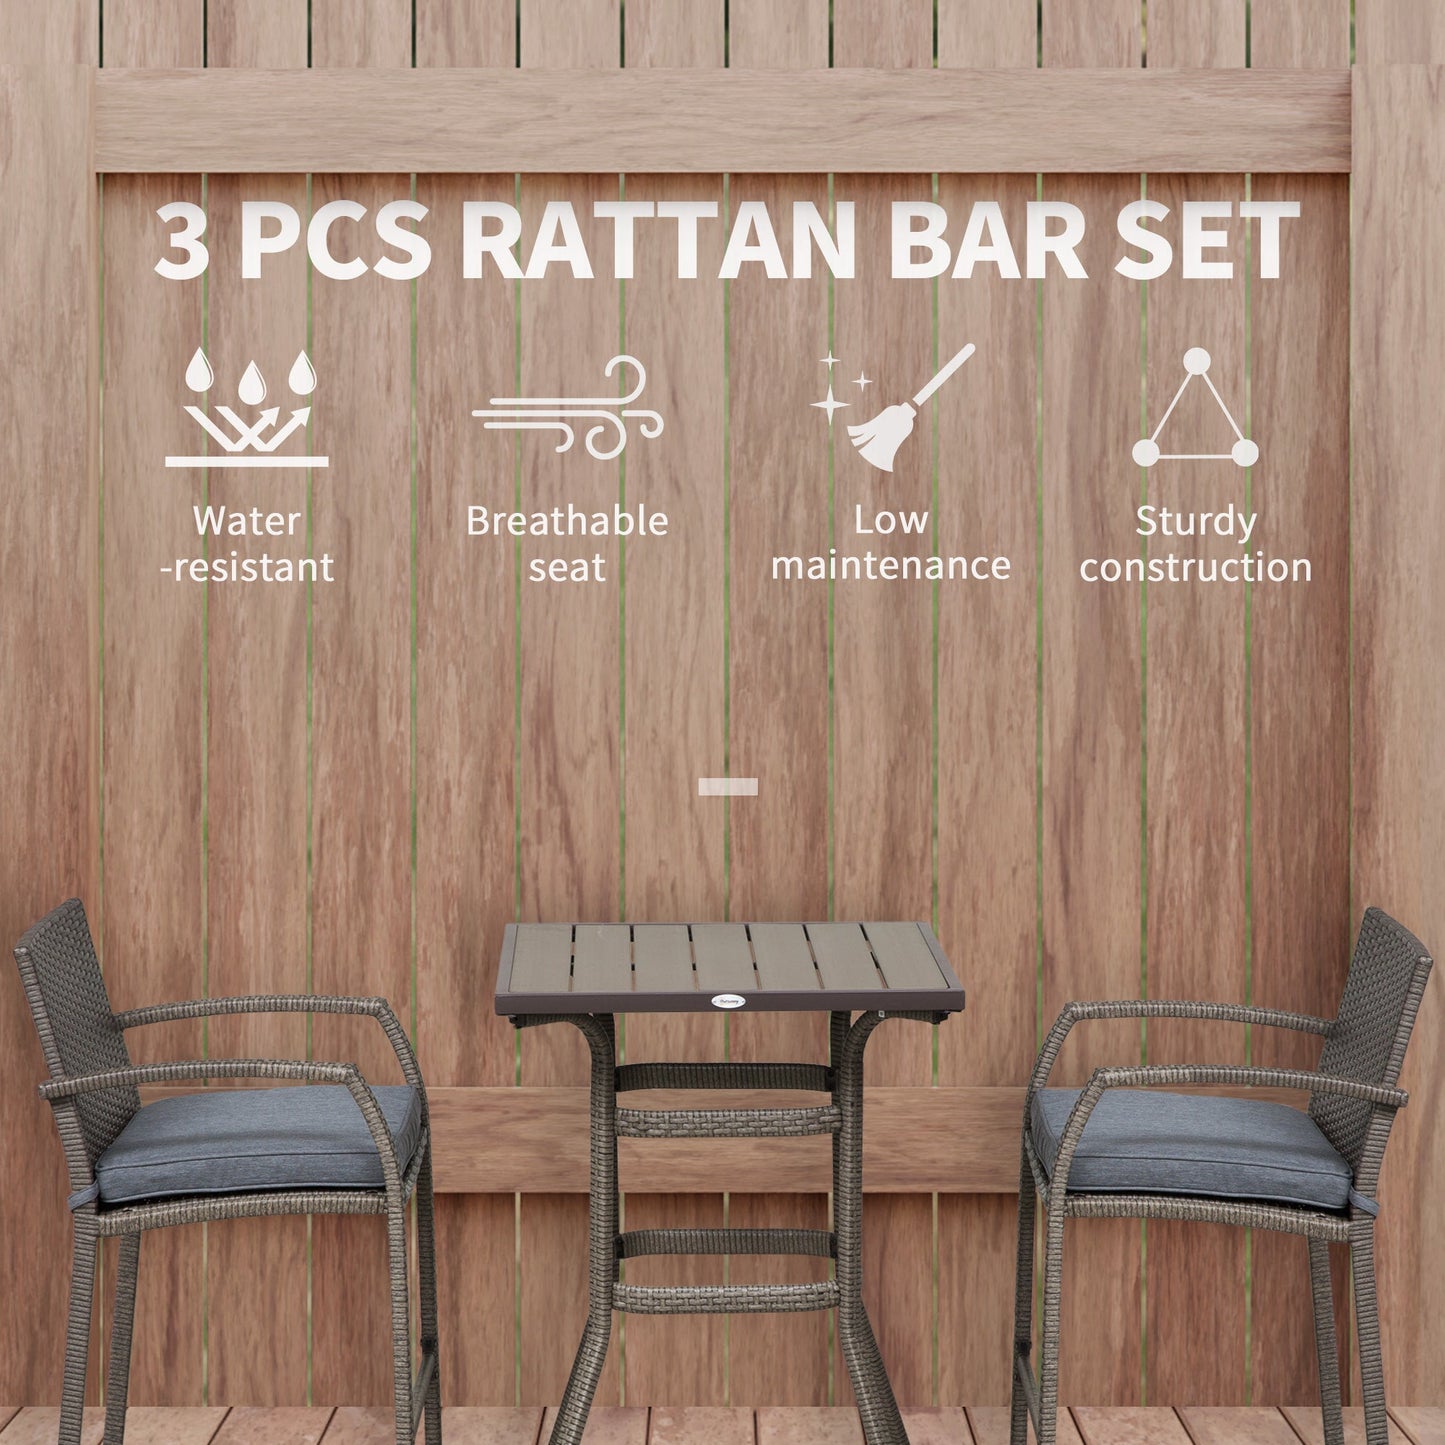 -Outsunny 3 PCS Rattan Wicker Bar Set with Wood Grain Top Table and 2 Bar Stools for Outdoor, Patio, Poolside, Garden, Grey - Outdoor Style Company